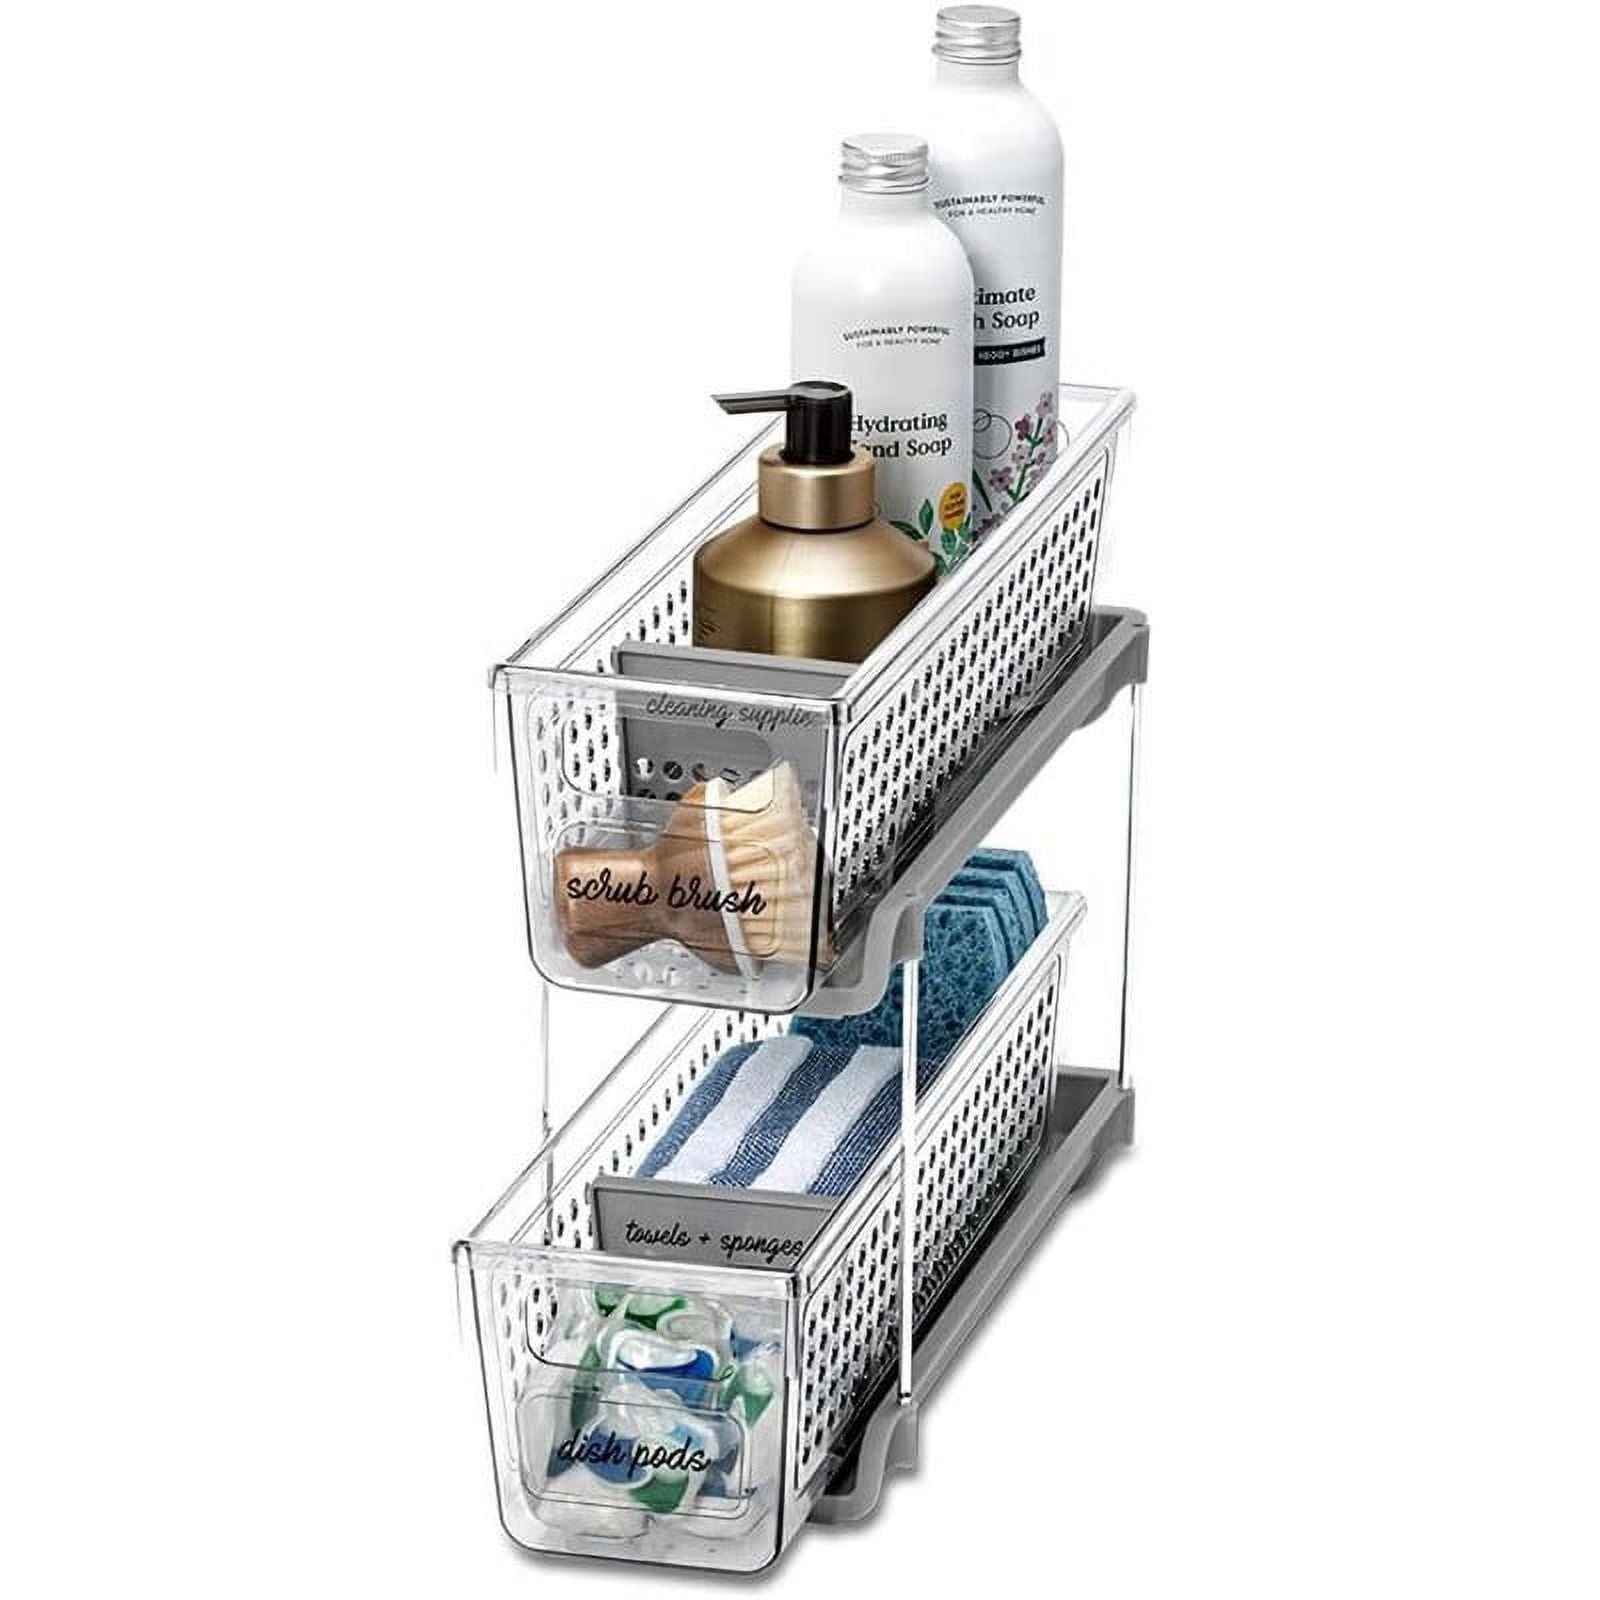 The madesmart® Two Tier Organizer is featured on TODAY! Read about